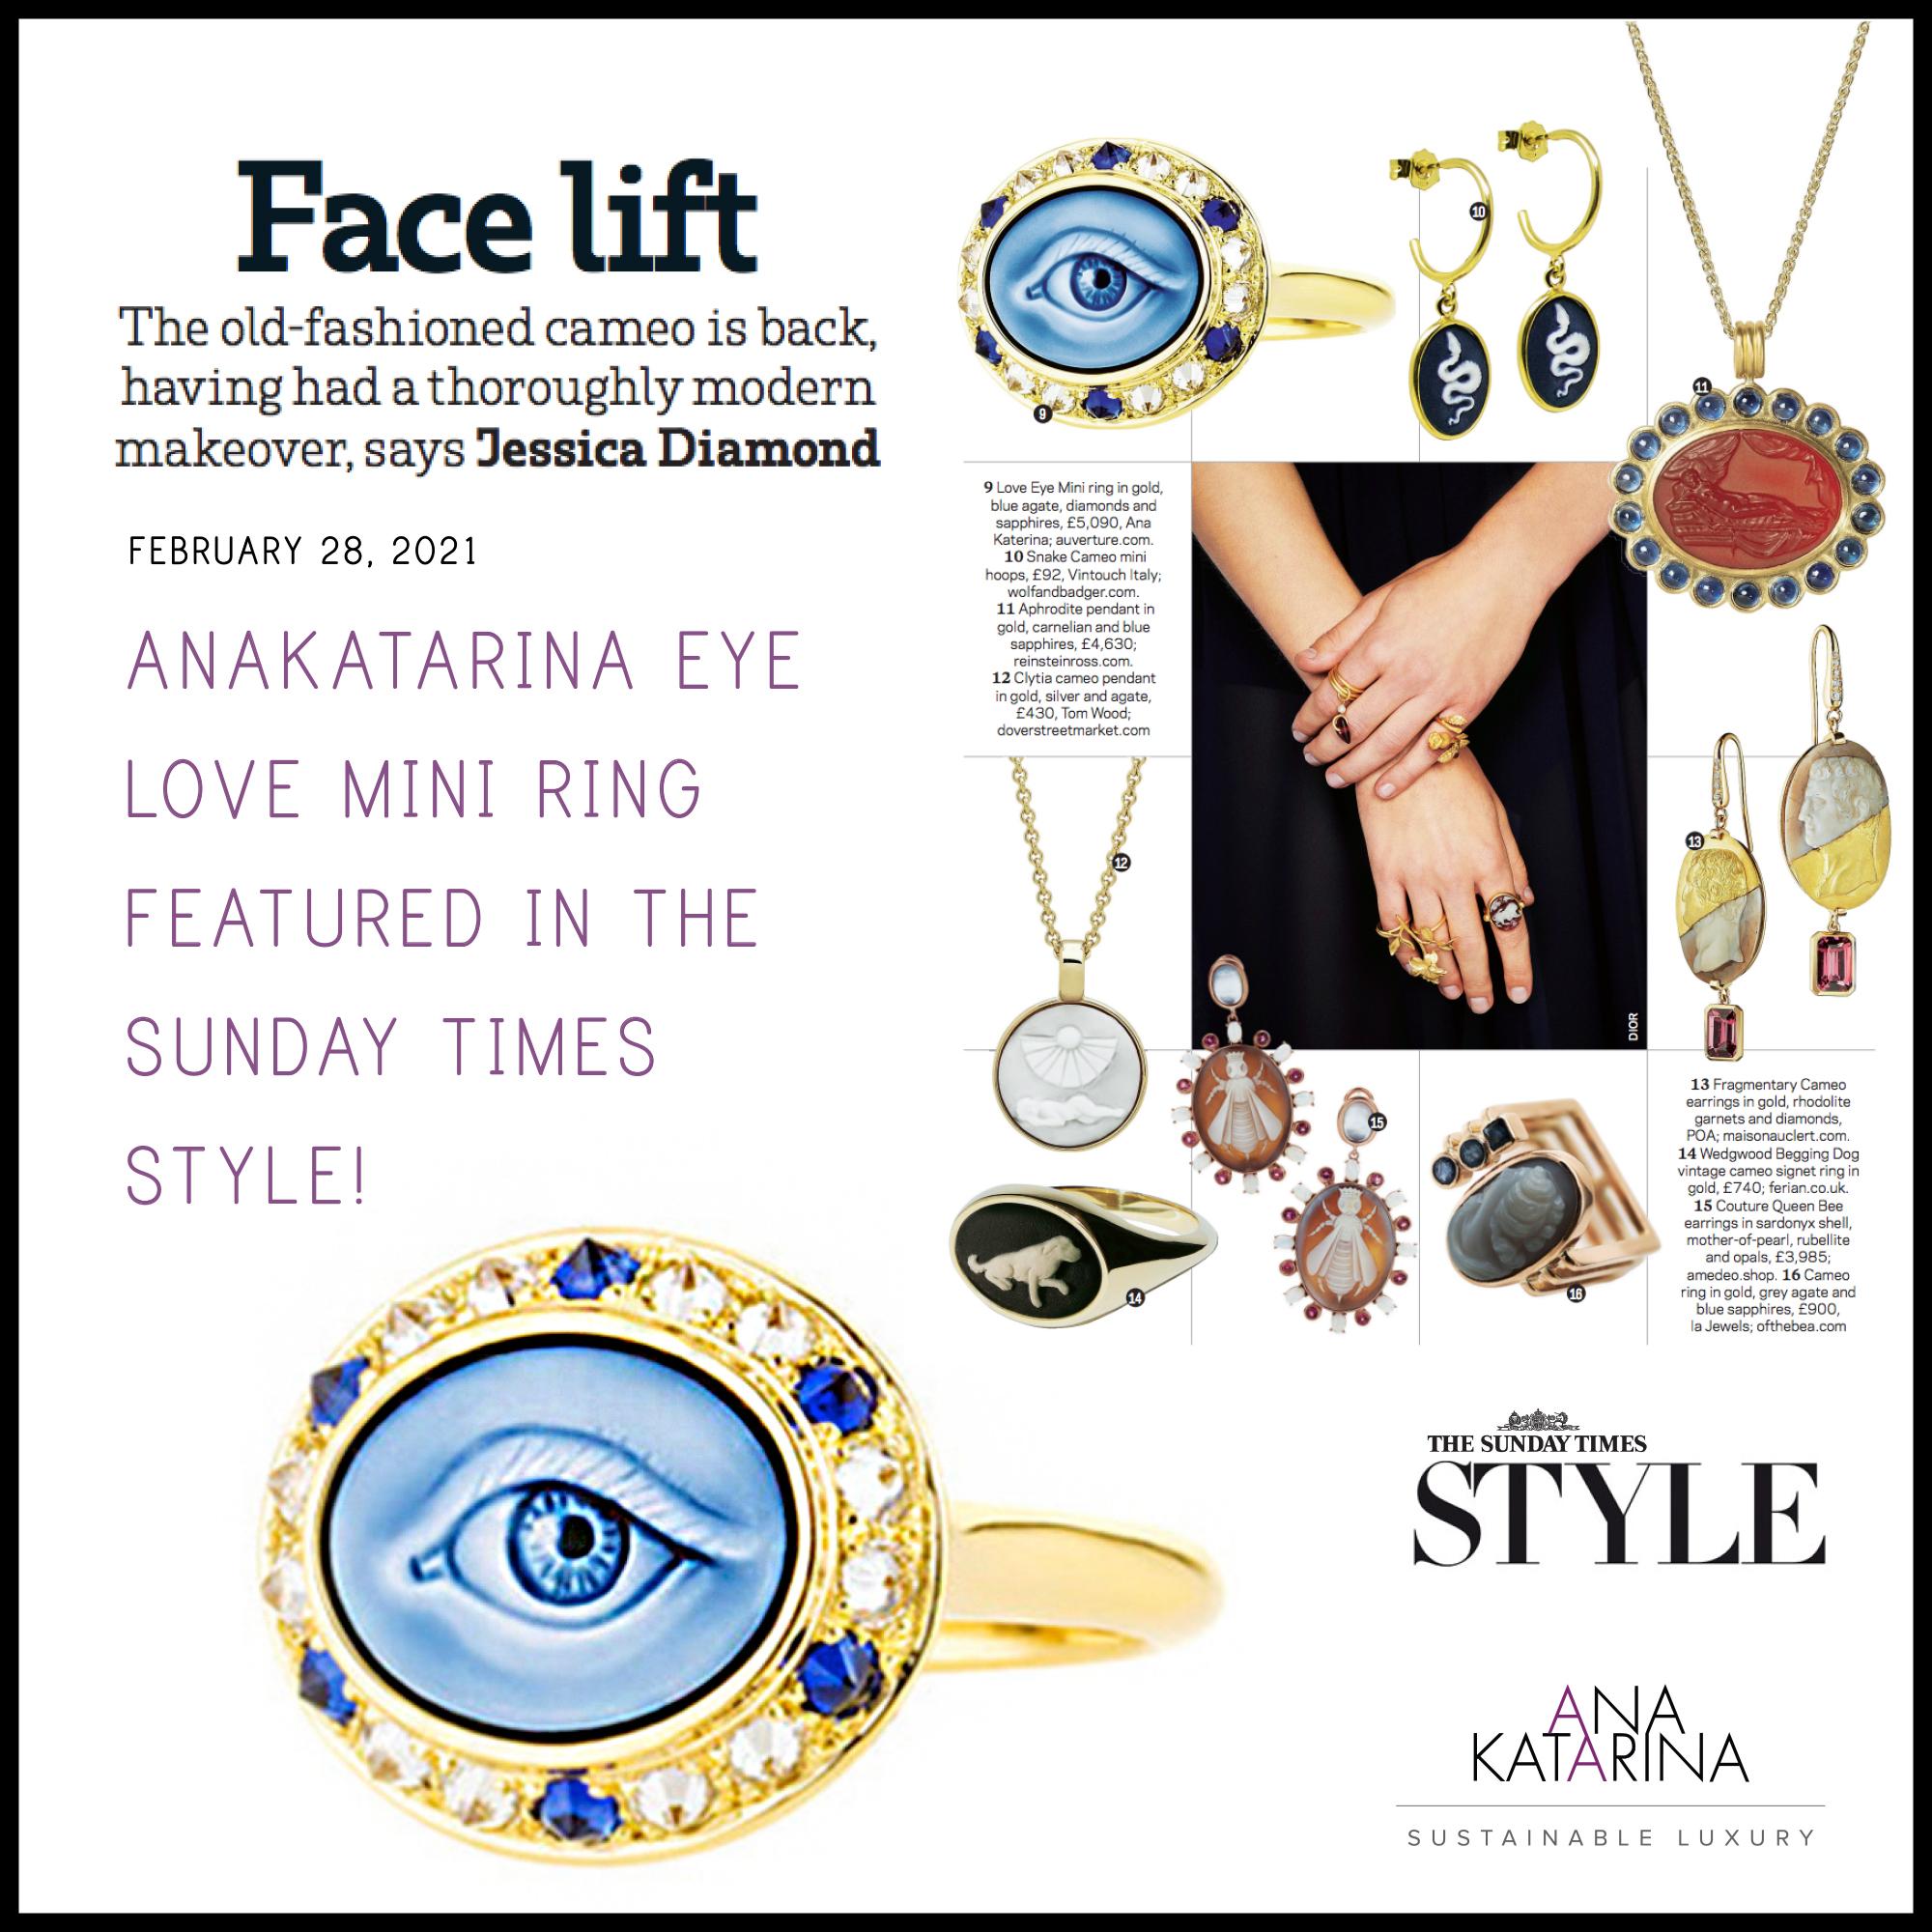 The blue agate cameo is hand created by a master carver bringing out the colors and depth within the stone's layers. Yellow gold set with inverted diamonds, in design homage to the sea urchin, surrounds the cameo. As in every piece in the